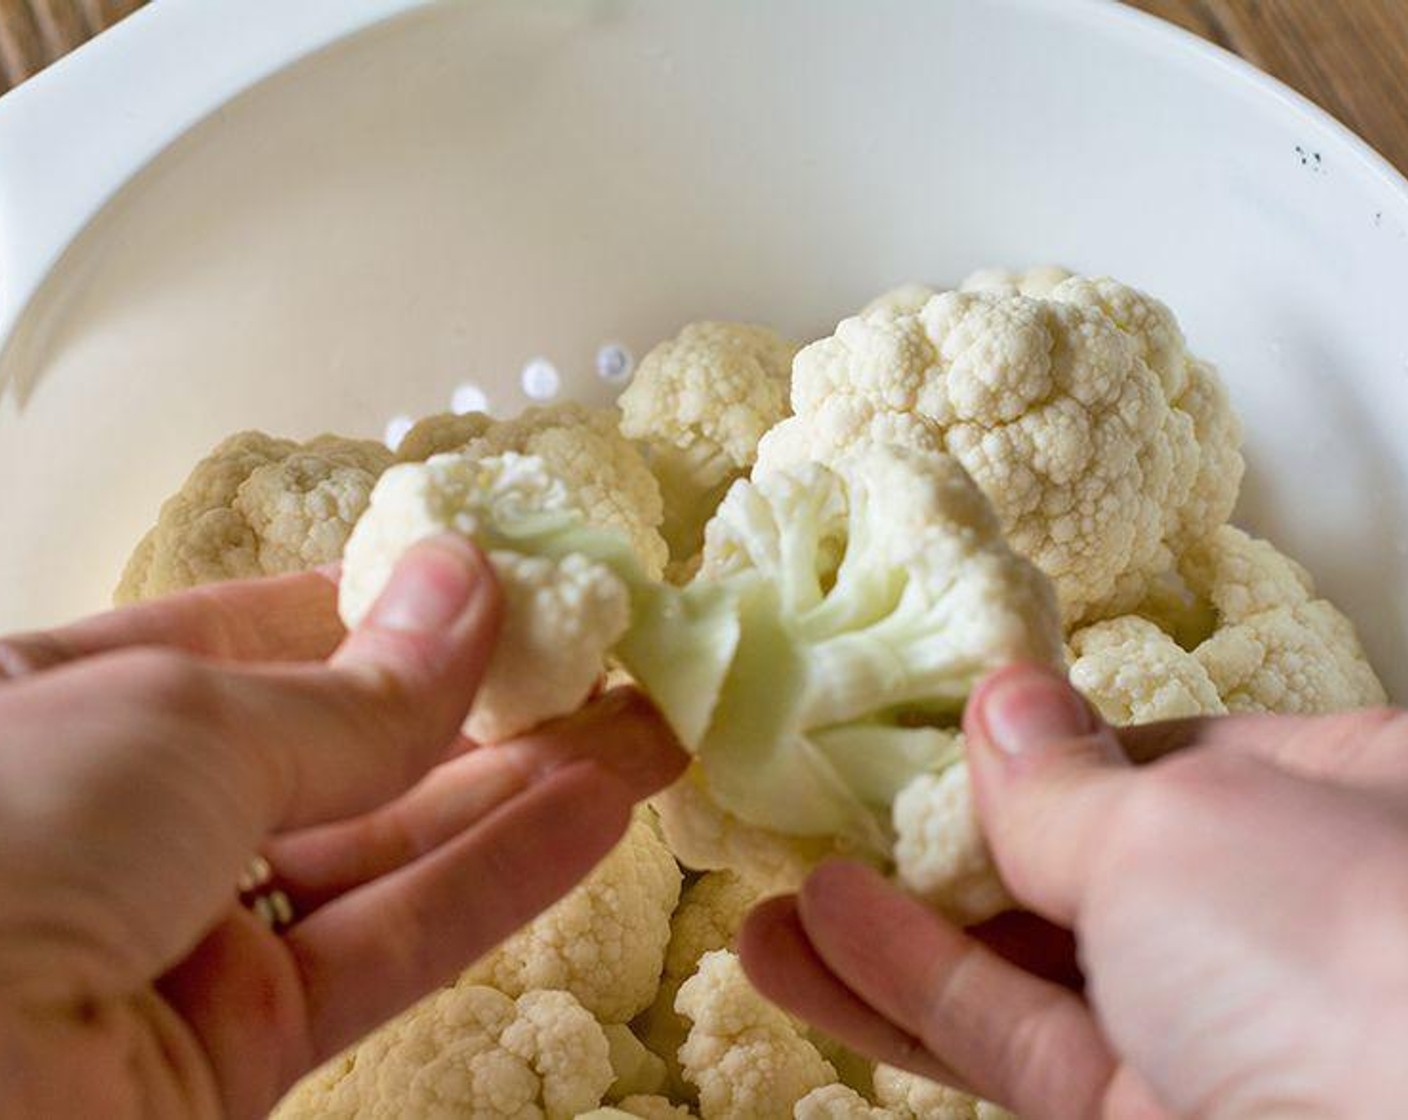 step 1 Add Cauliflower Florets (4 1/4 cups) in a large pot and cover with water. Bring to a low boil. Once boiling, cook for 5-6 minutes until tender. Drain water and set aside.